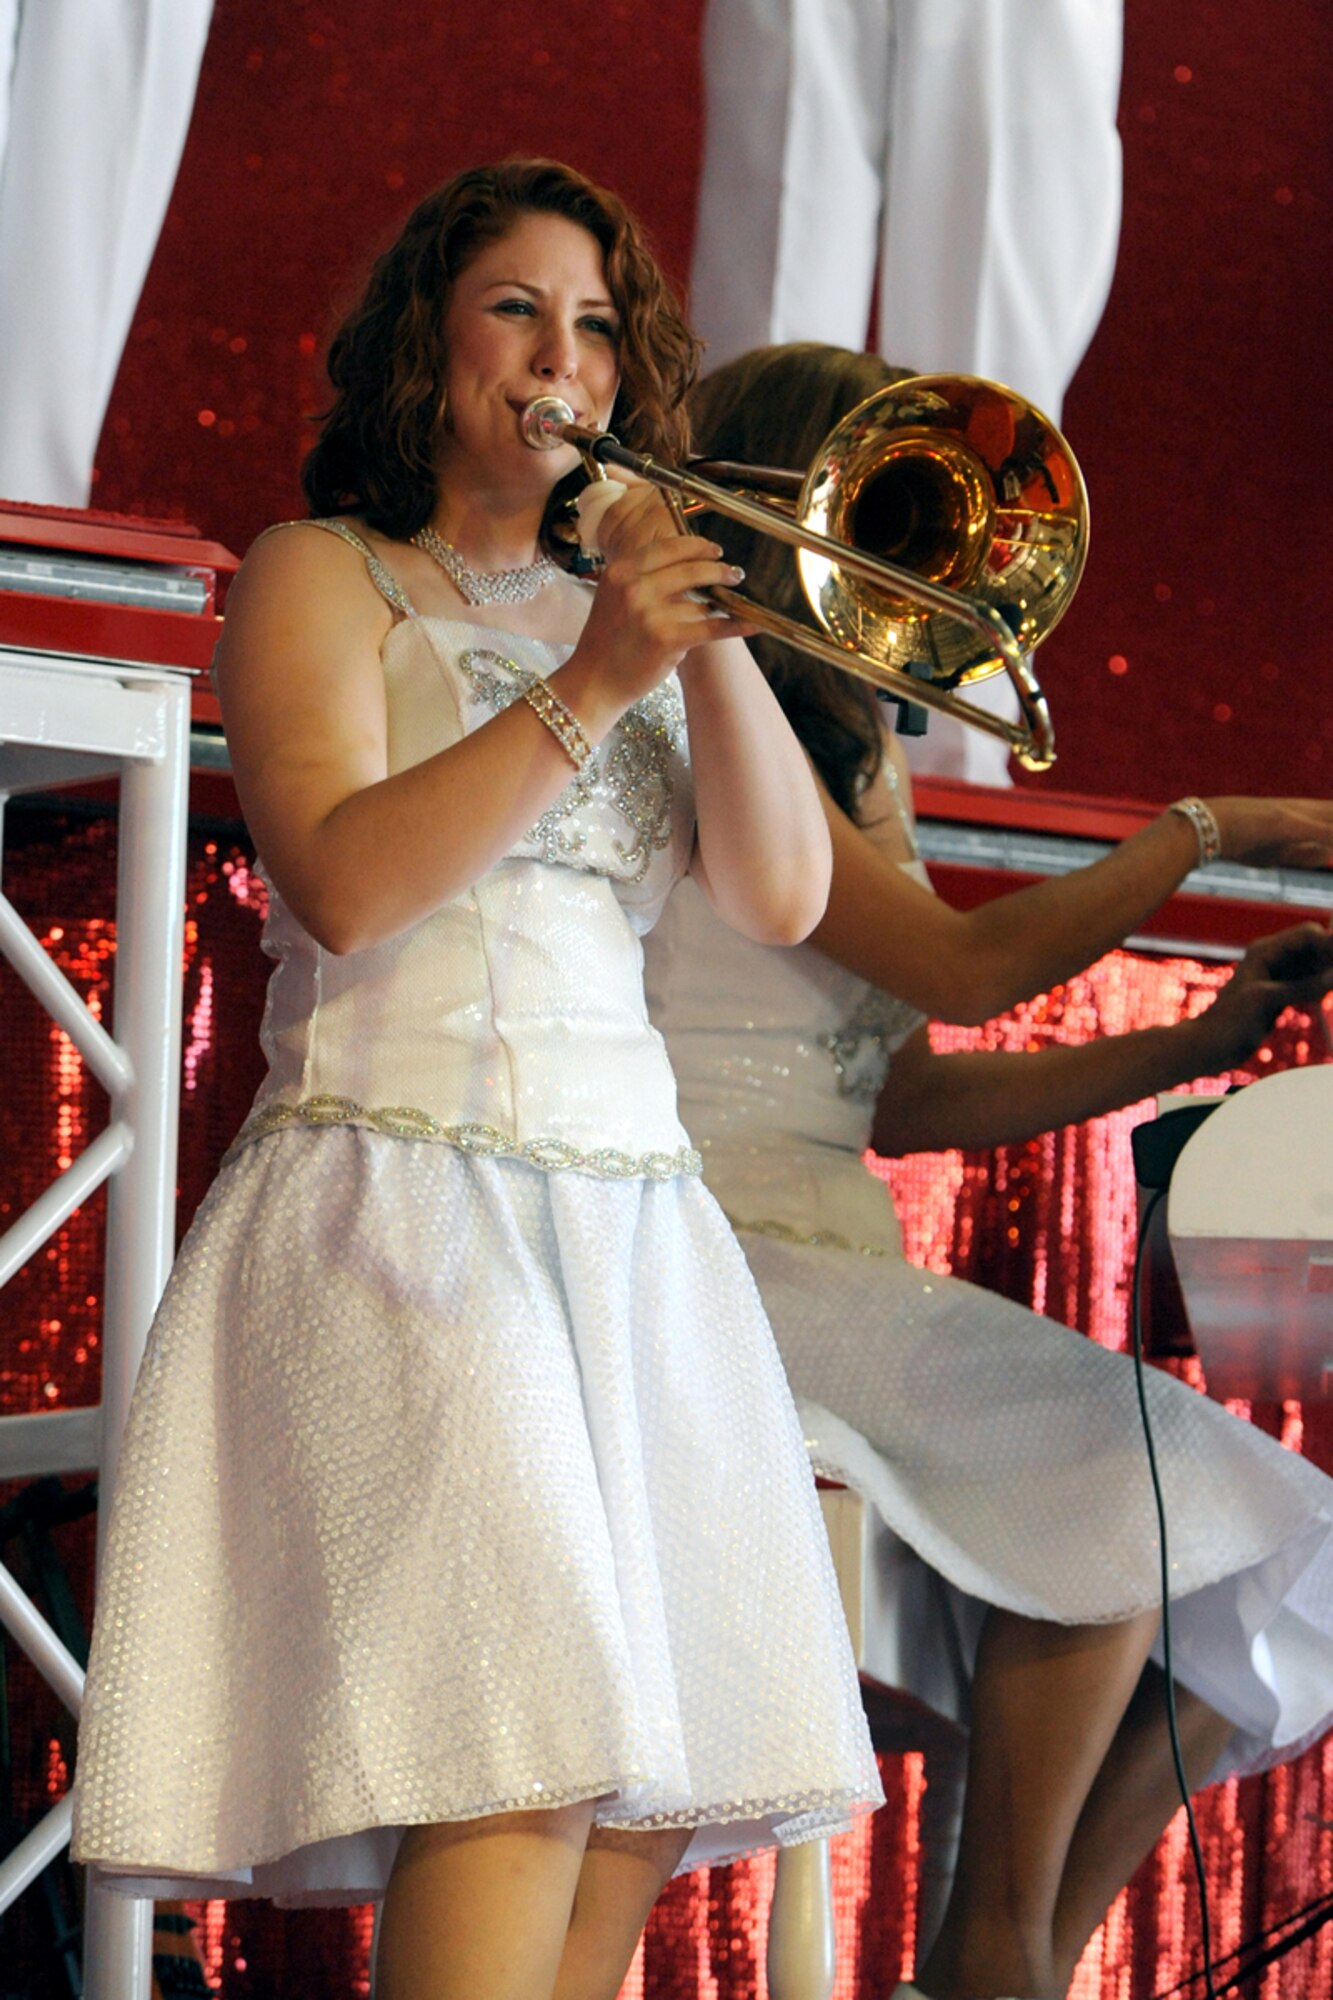 Senior Airman Victoria Howard, trombonist for
the 2009 Tops in Blue tour, plays before a crowd of during Hill Air Force Base's Open House during Air Force Week Salt Lake City, June 6.  Airman Howard is assigned to the 459th Aeromedical Evacuation Squadron at Andrews Air Force Base, MD. (U.S. Air Force Photo by Staff Sgt. Kyle Brasier)

